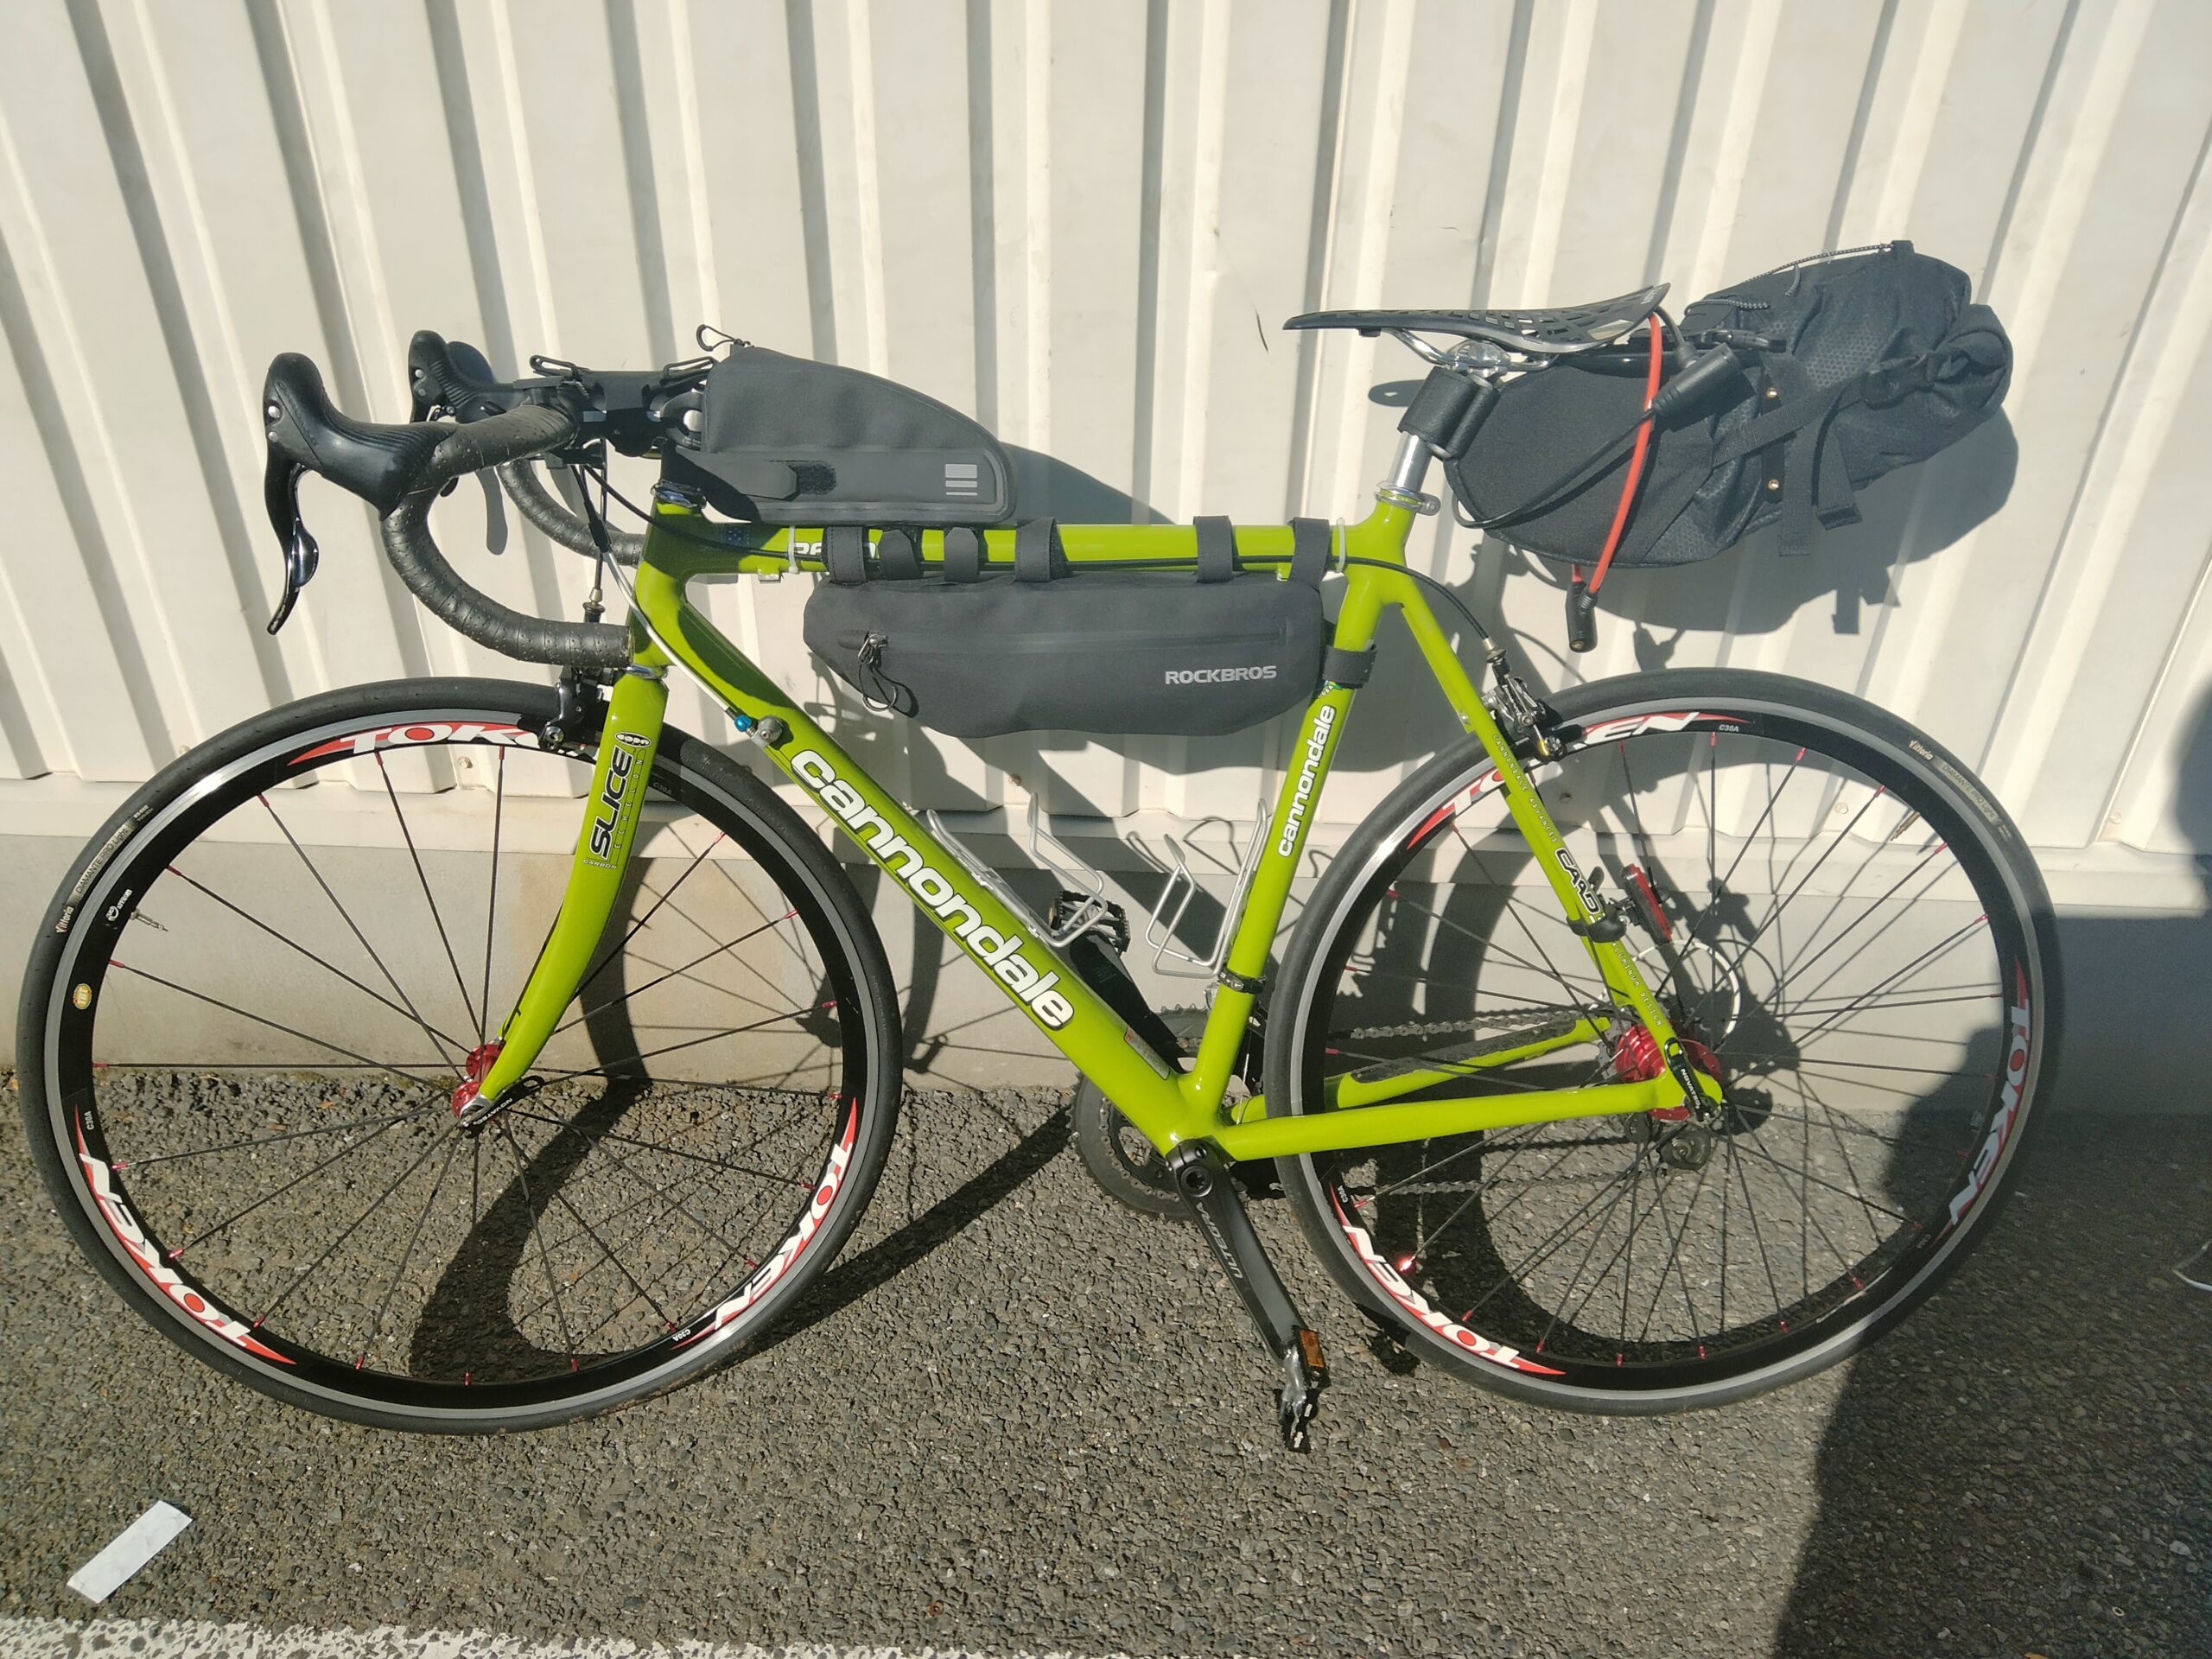 Cannondale R600 少し古いアルミロードバイクの紹介！！ | 自転車旅行 